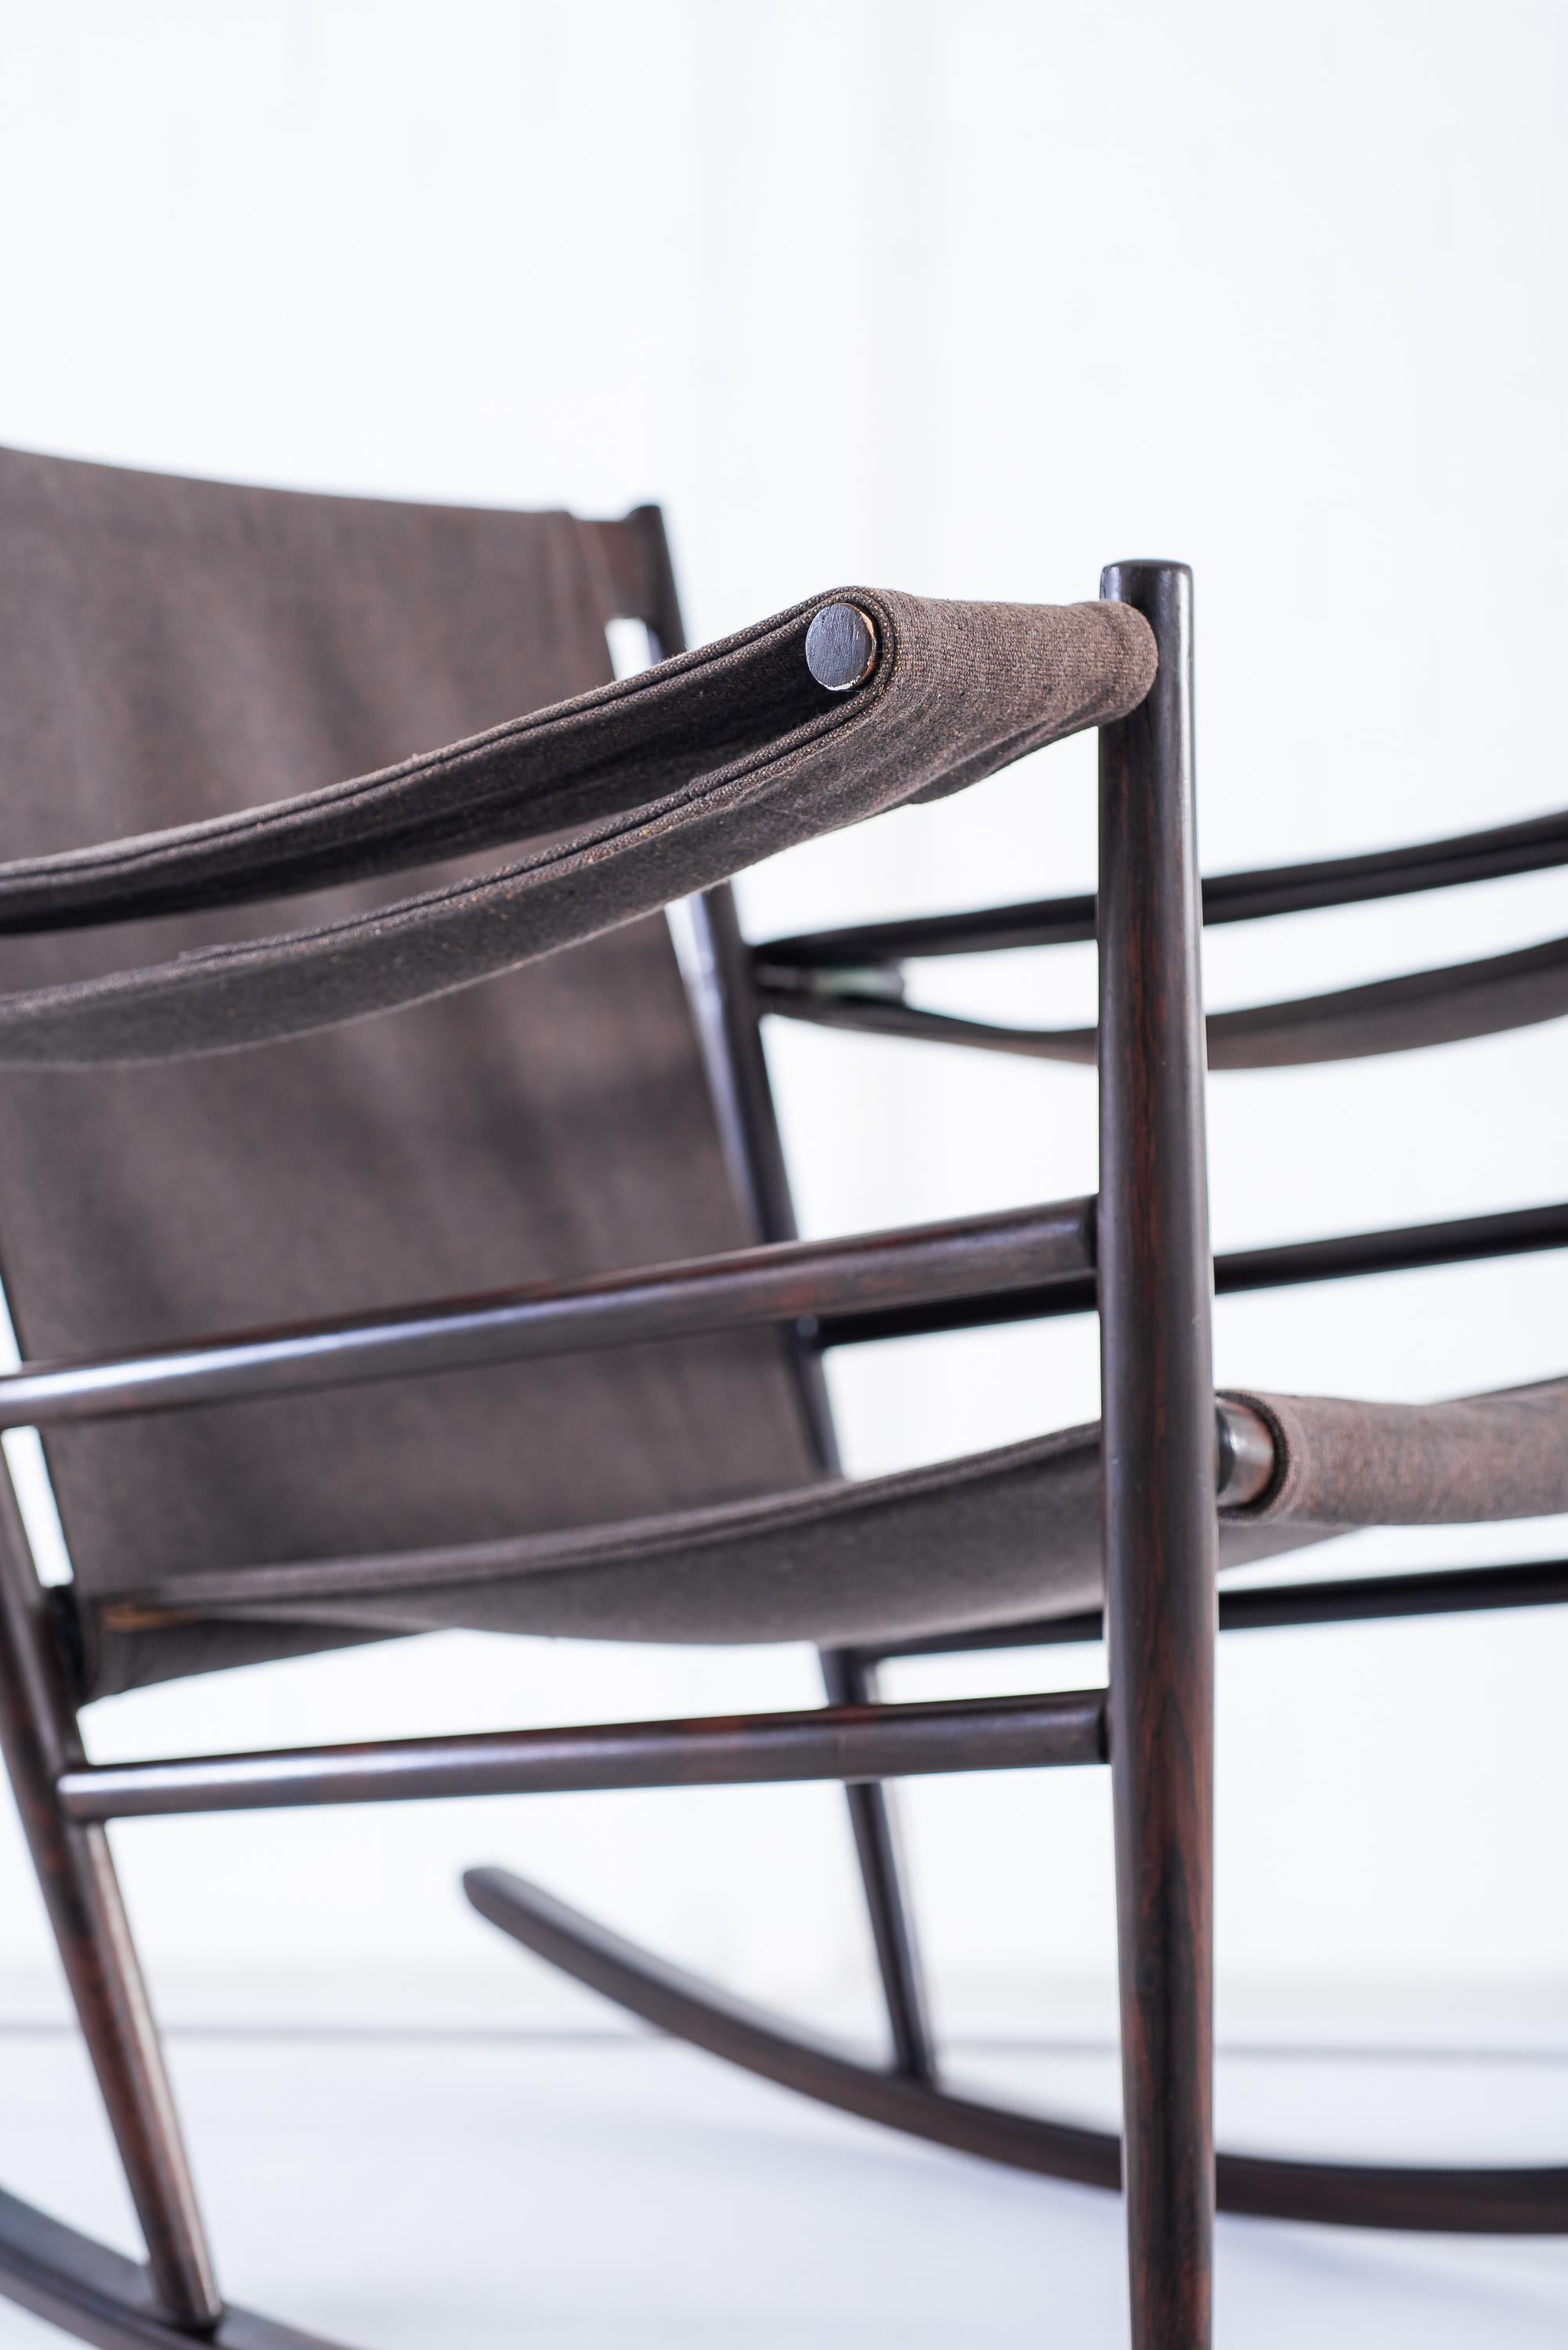 Tenreiro's rocking chair is one of his masterpieces. 
No doubt, it's an icon of Tenreiro's much-celebrated work.

This piece is in its original vintage condition.